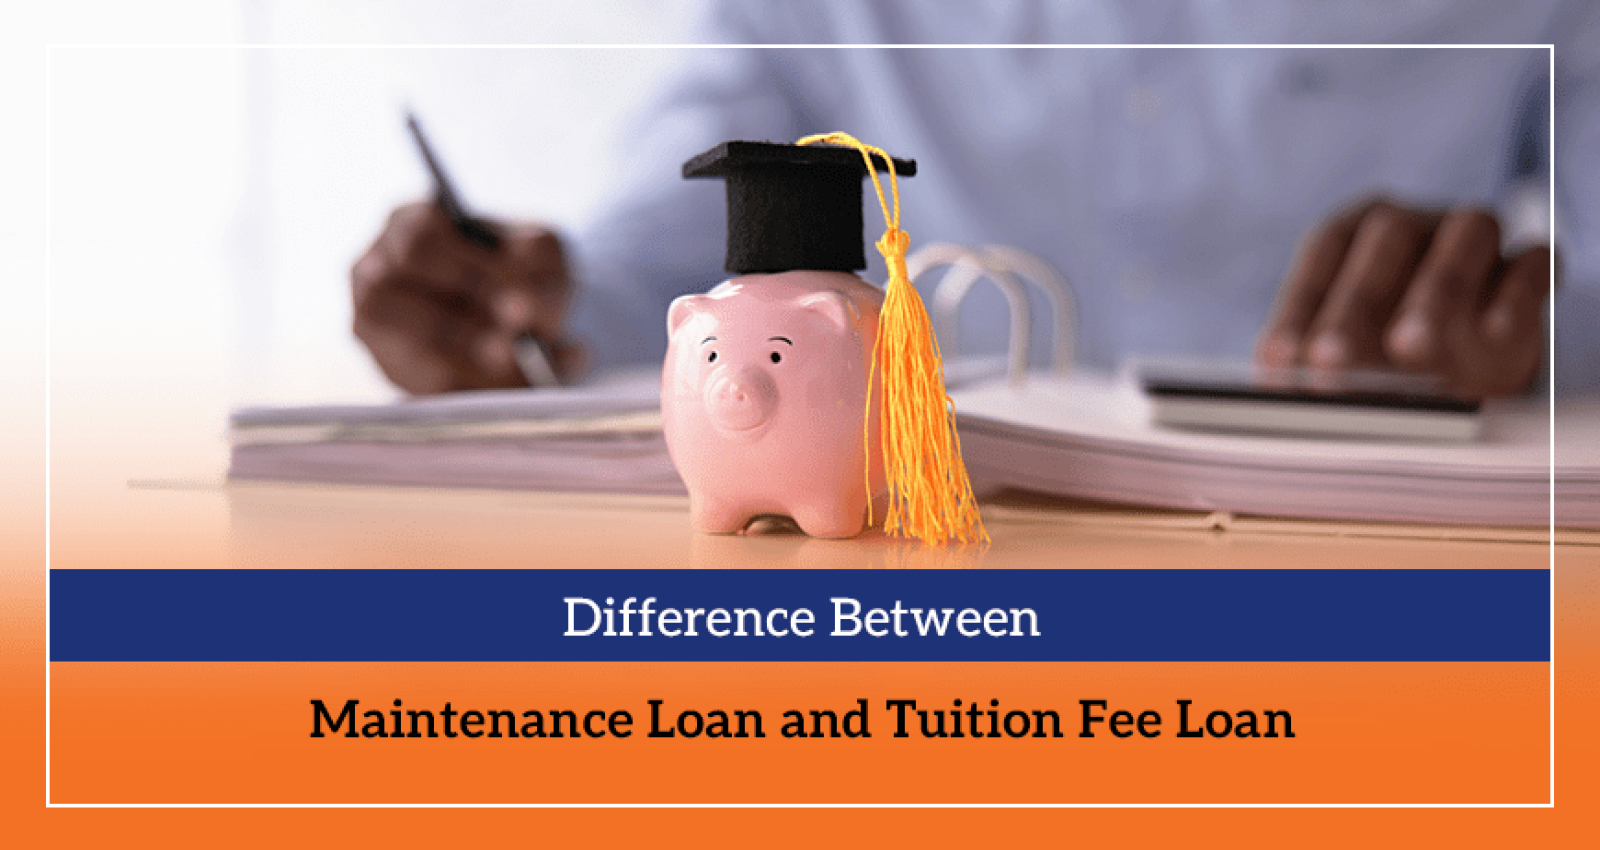 Difference Between Maintenance Loan and Tuition Fee Loan